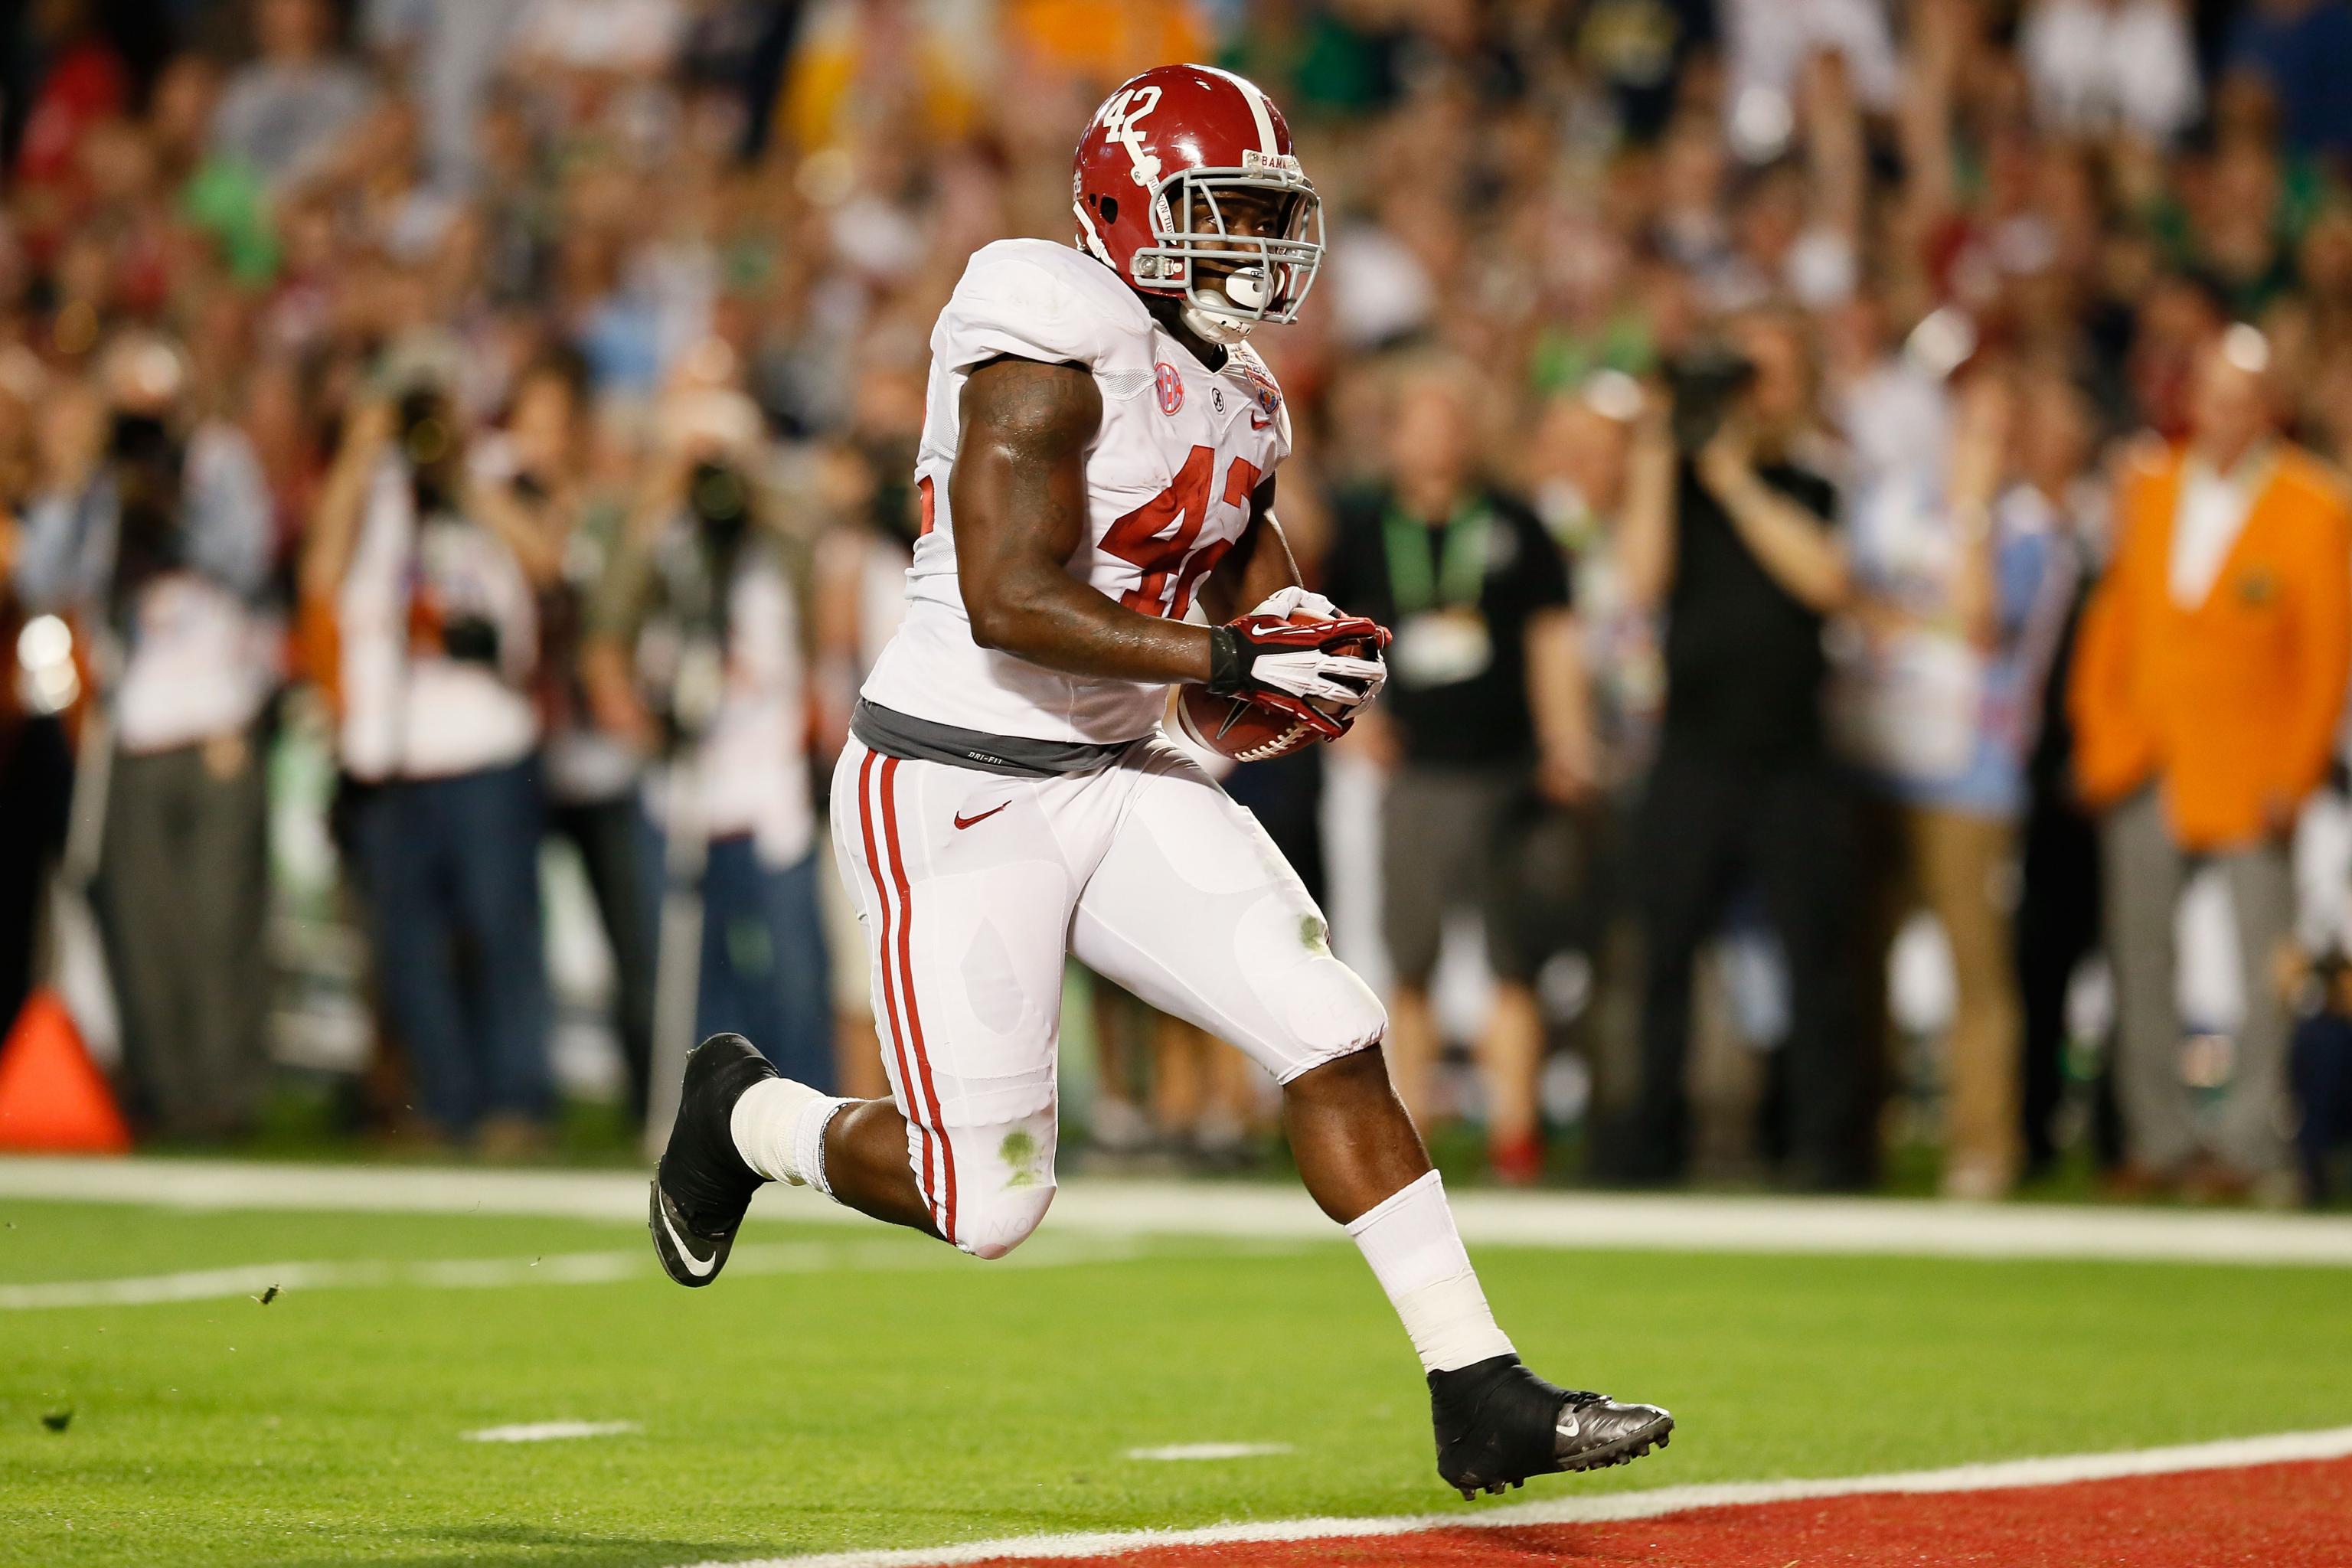 Eddie Lacy scores two ways again to highlight Alabama's NFL Week